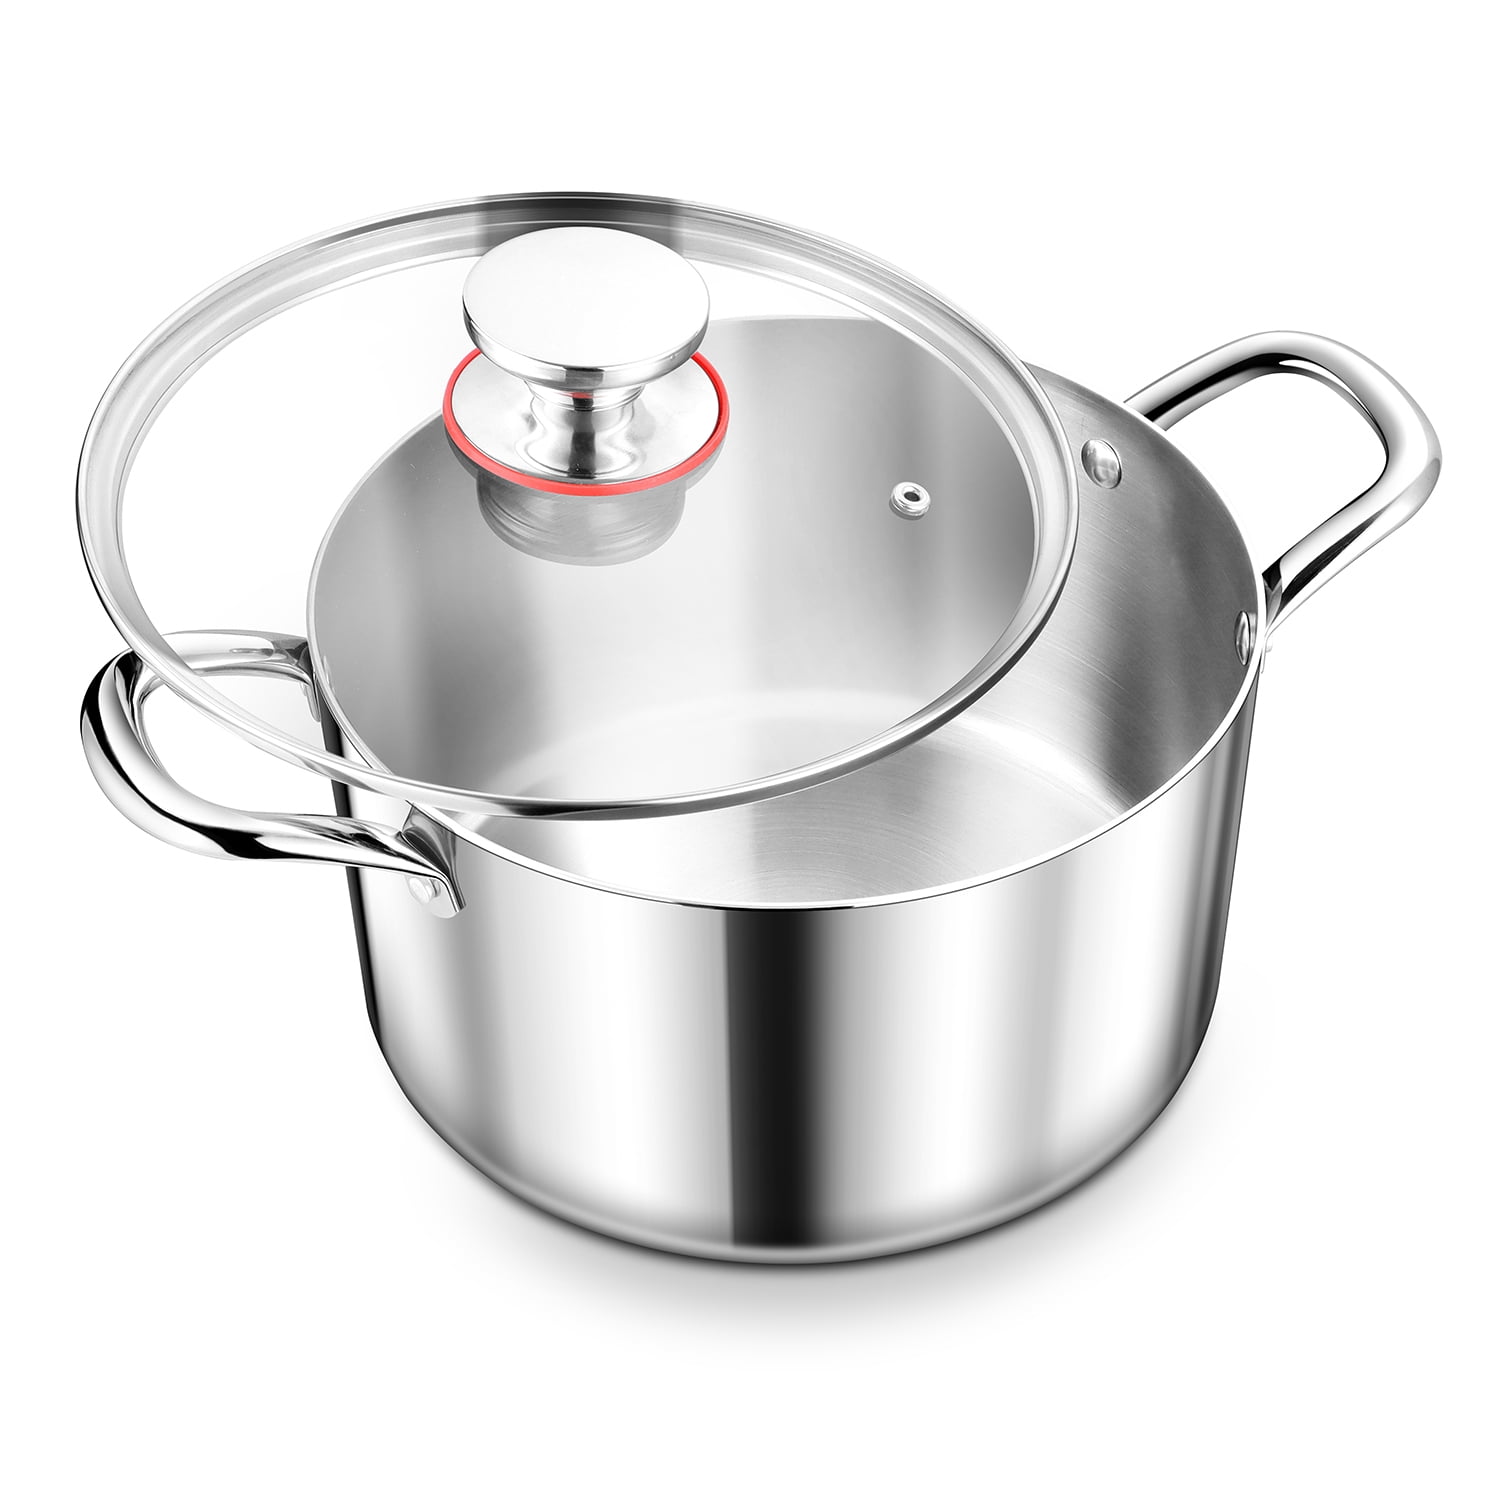 Walchoice 6 Quart Stockpot with Lid, Stainless Steel Pasta Soup Pot for  Home Restaurant Hotel, Heat-Proof & Double Handles 